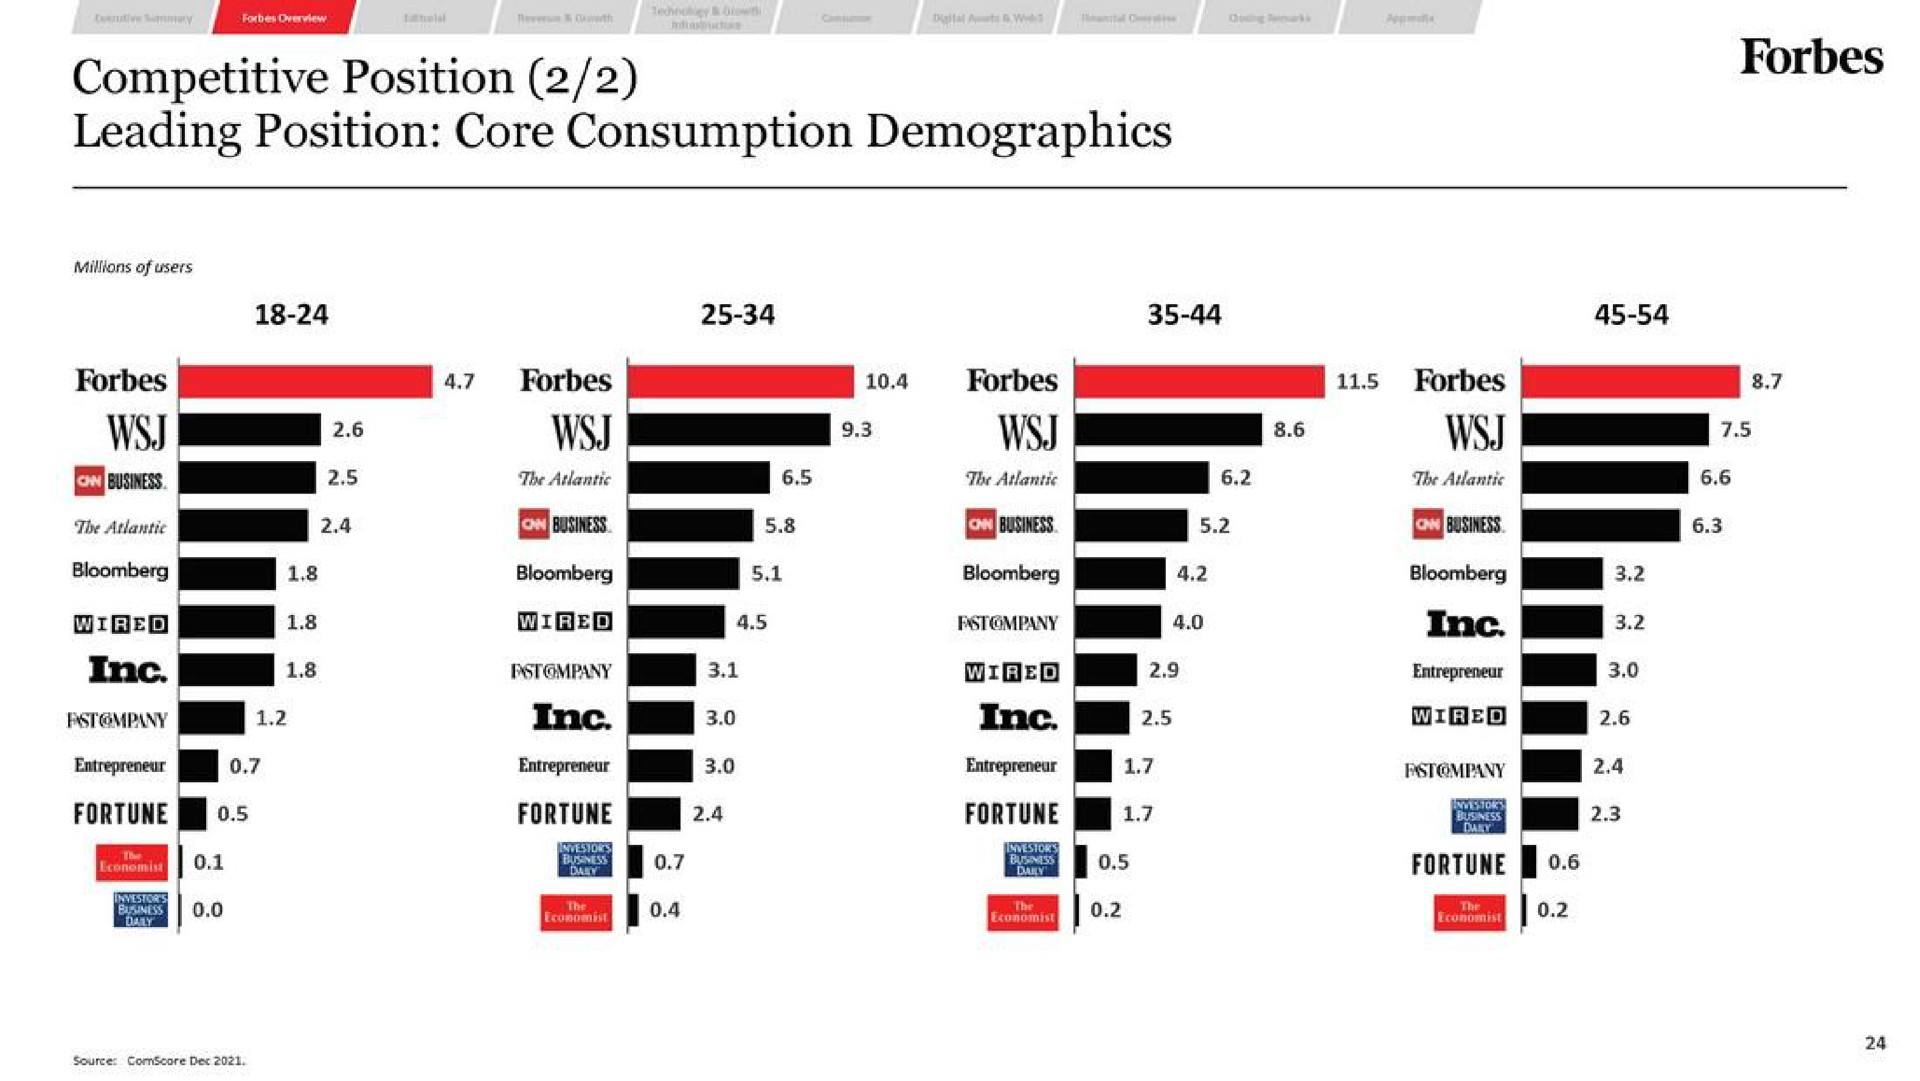 leading position core consumption demographics as i | Forbes